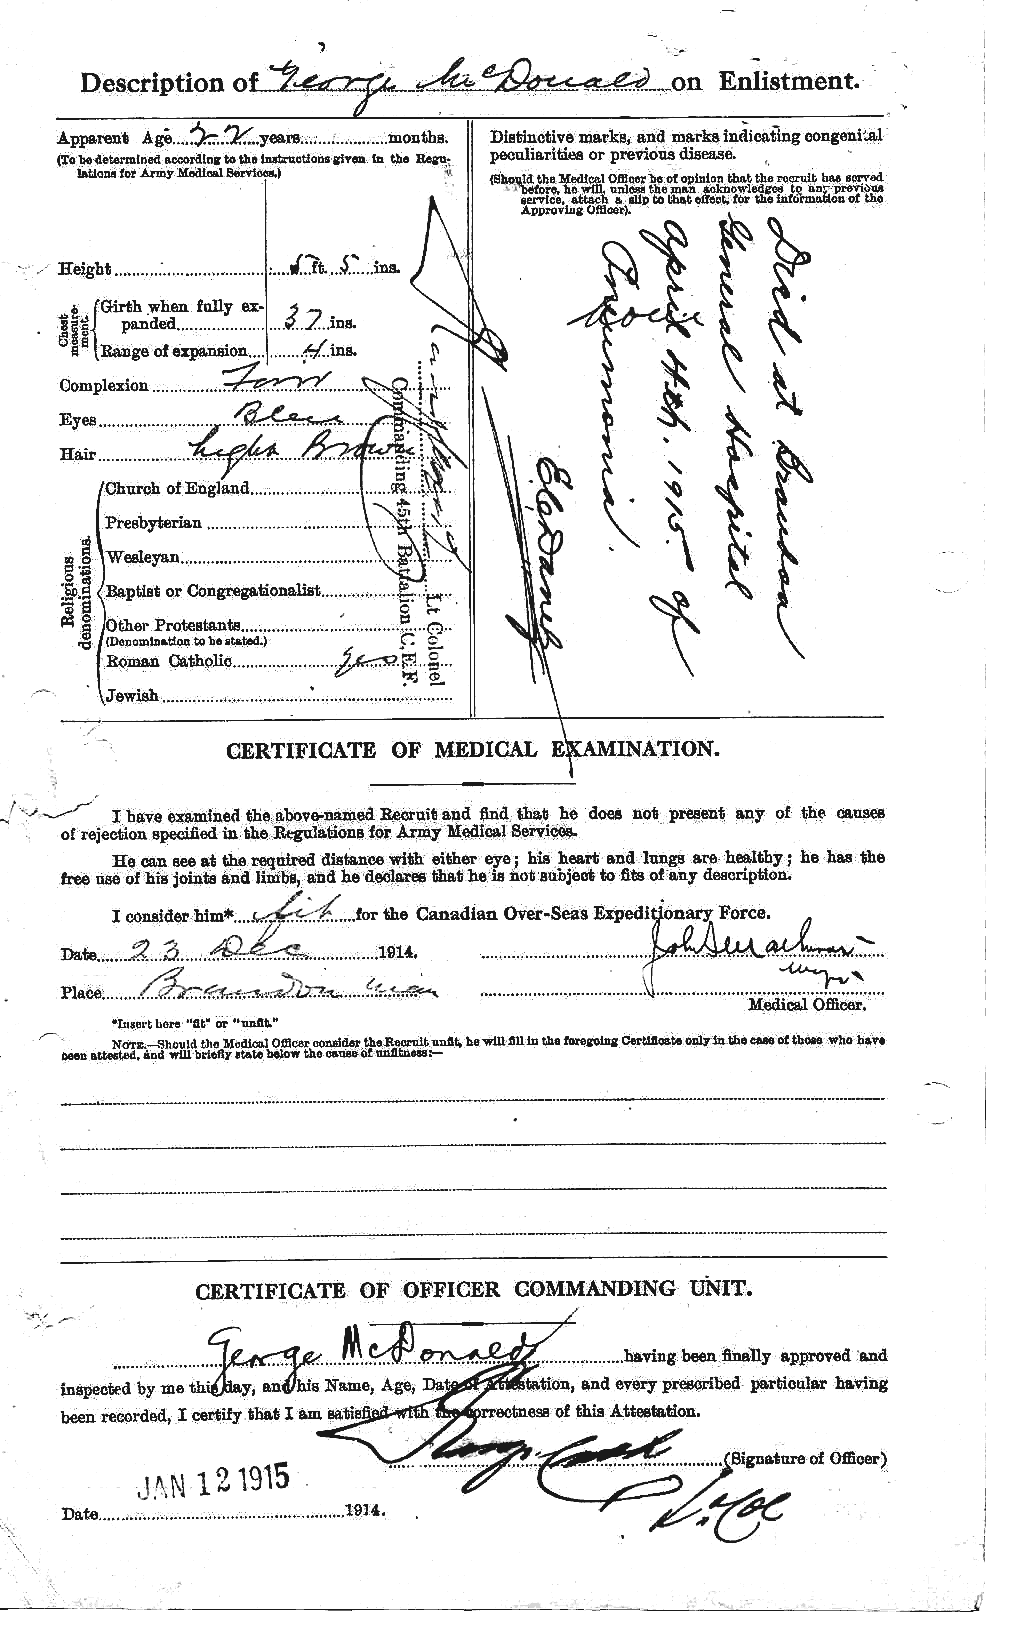 Personnel Records of the First World War - CEF 518784b